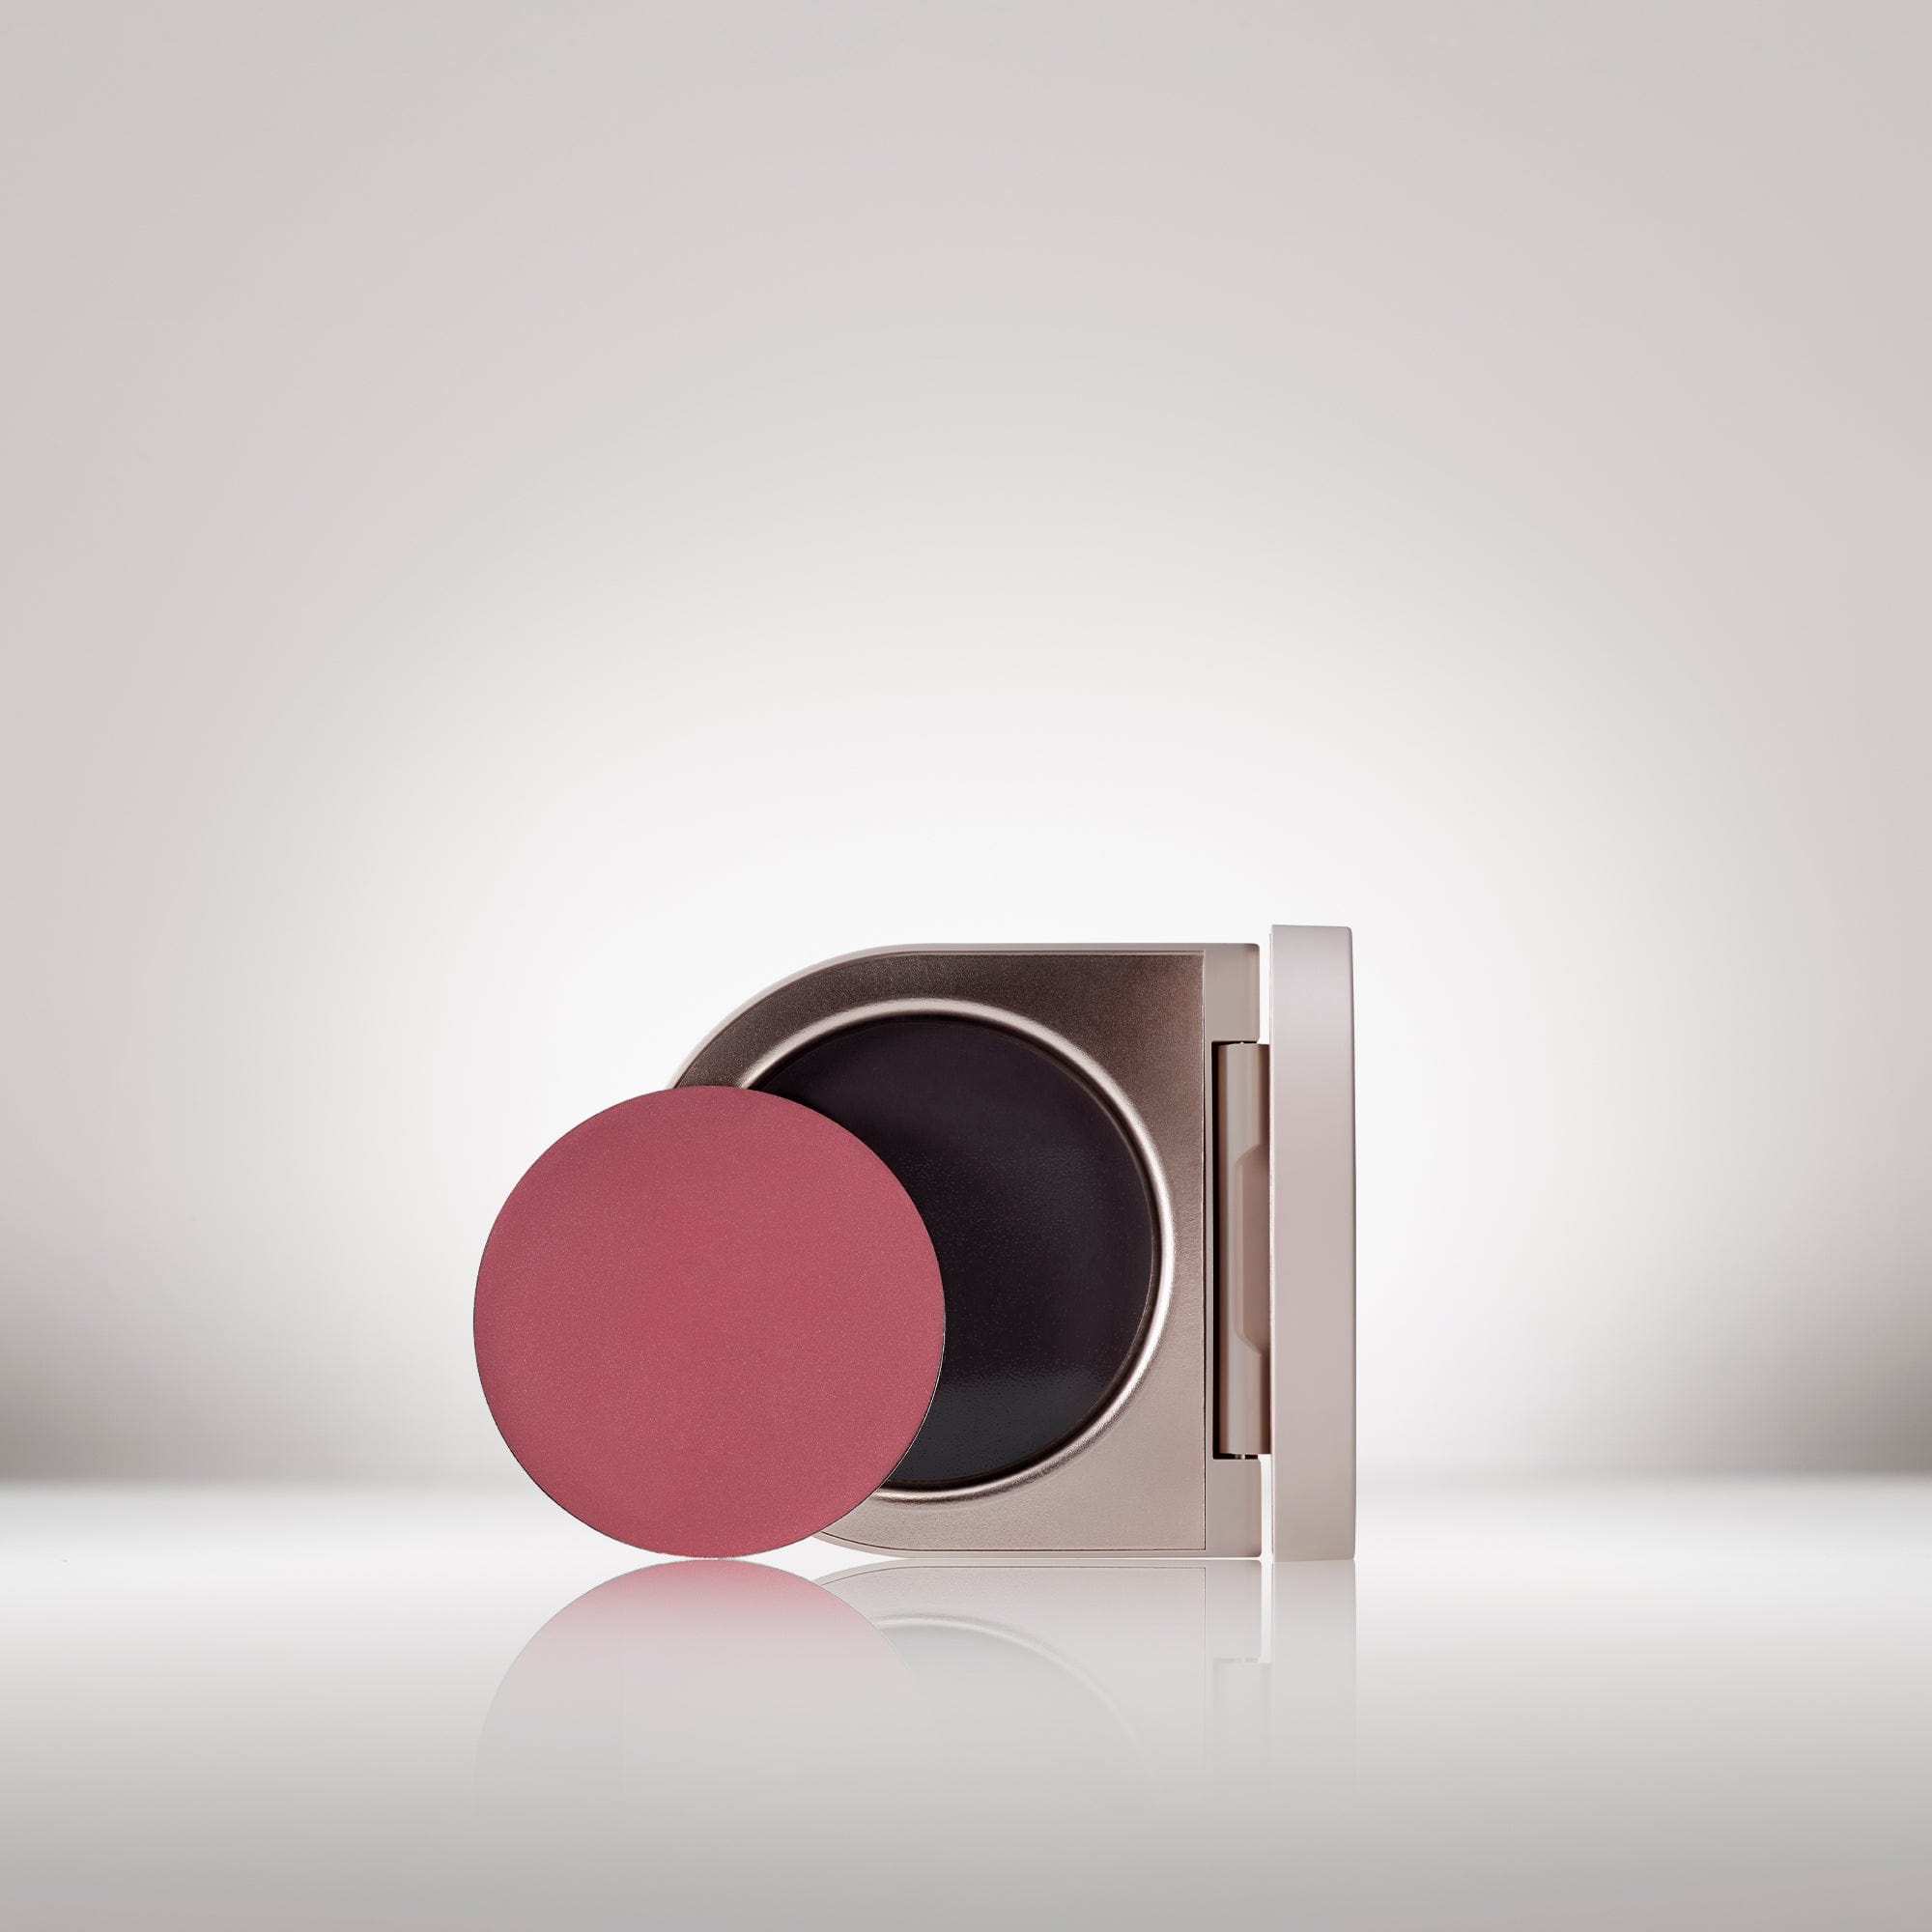 Image of the Cream Blush Refillable Cheek & Lip Color in Hibiscus in front of the open compact- Cream blush